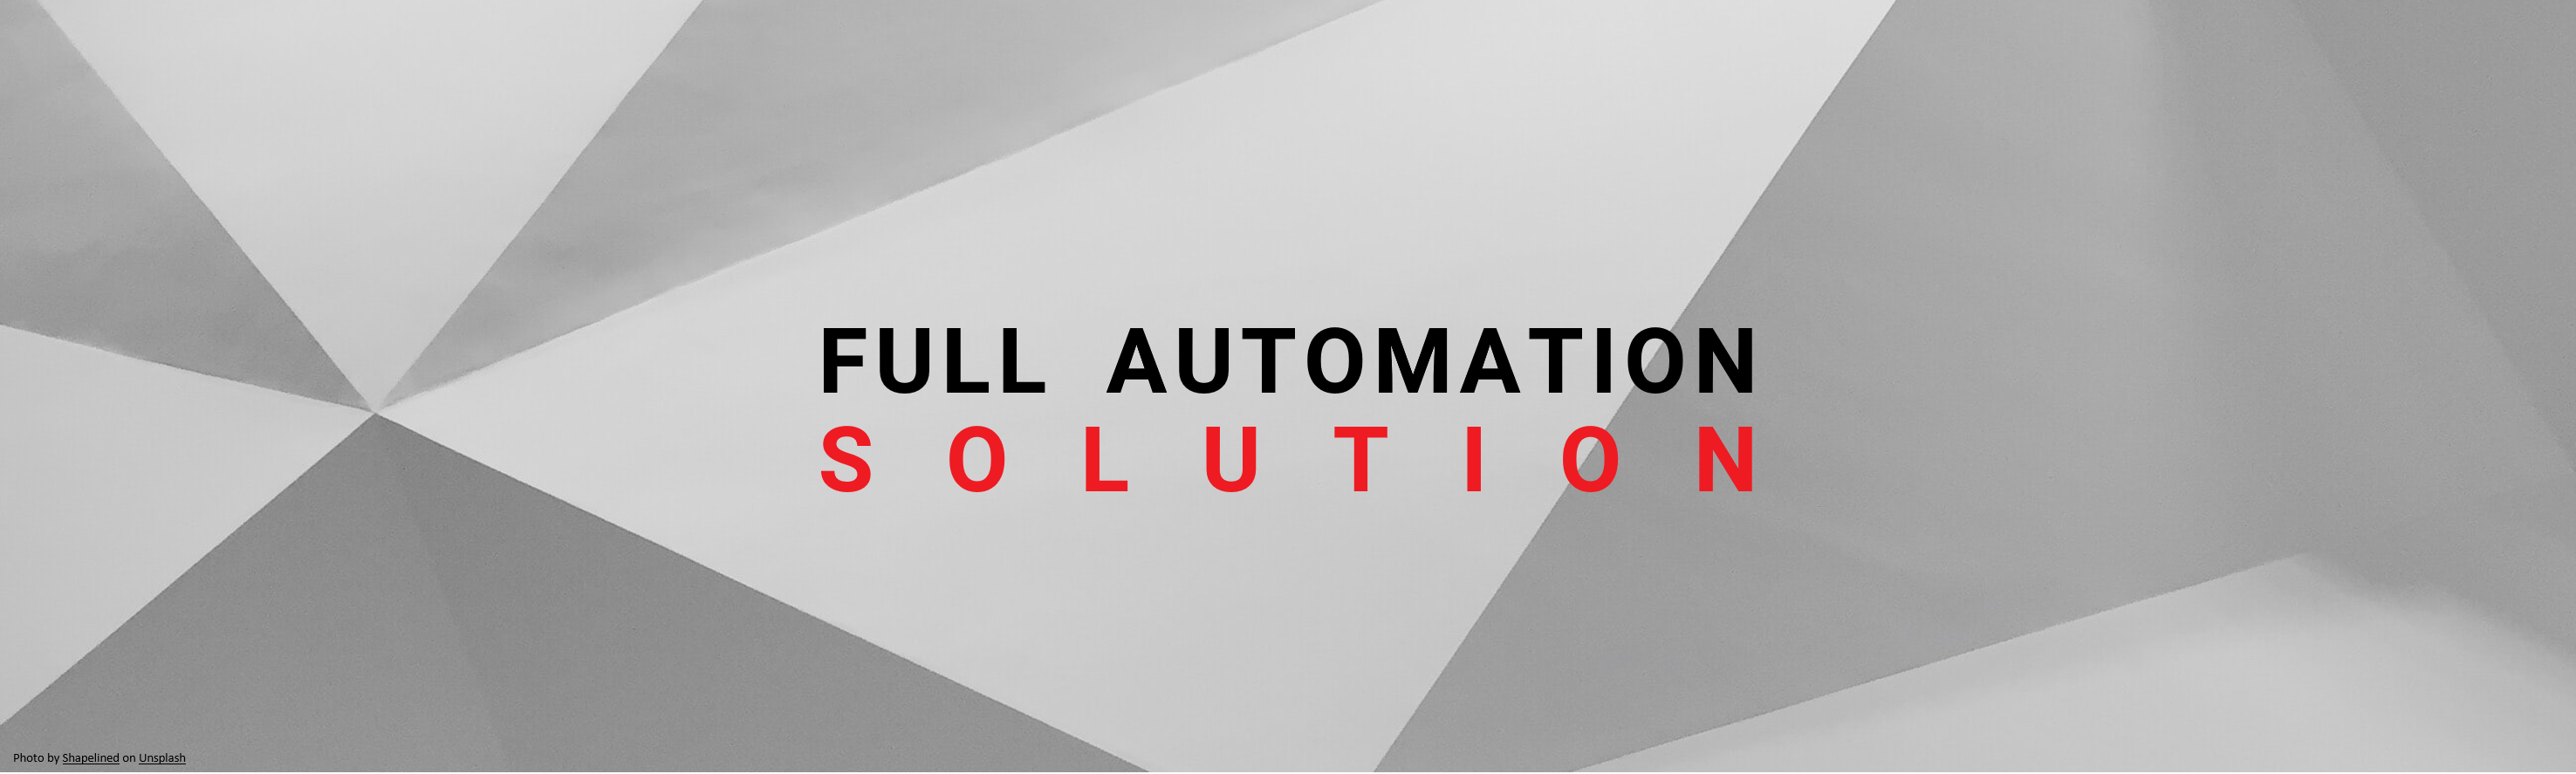 Full Automation Solution 2